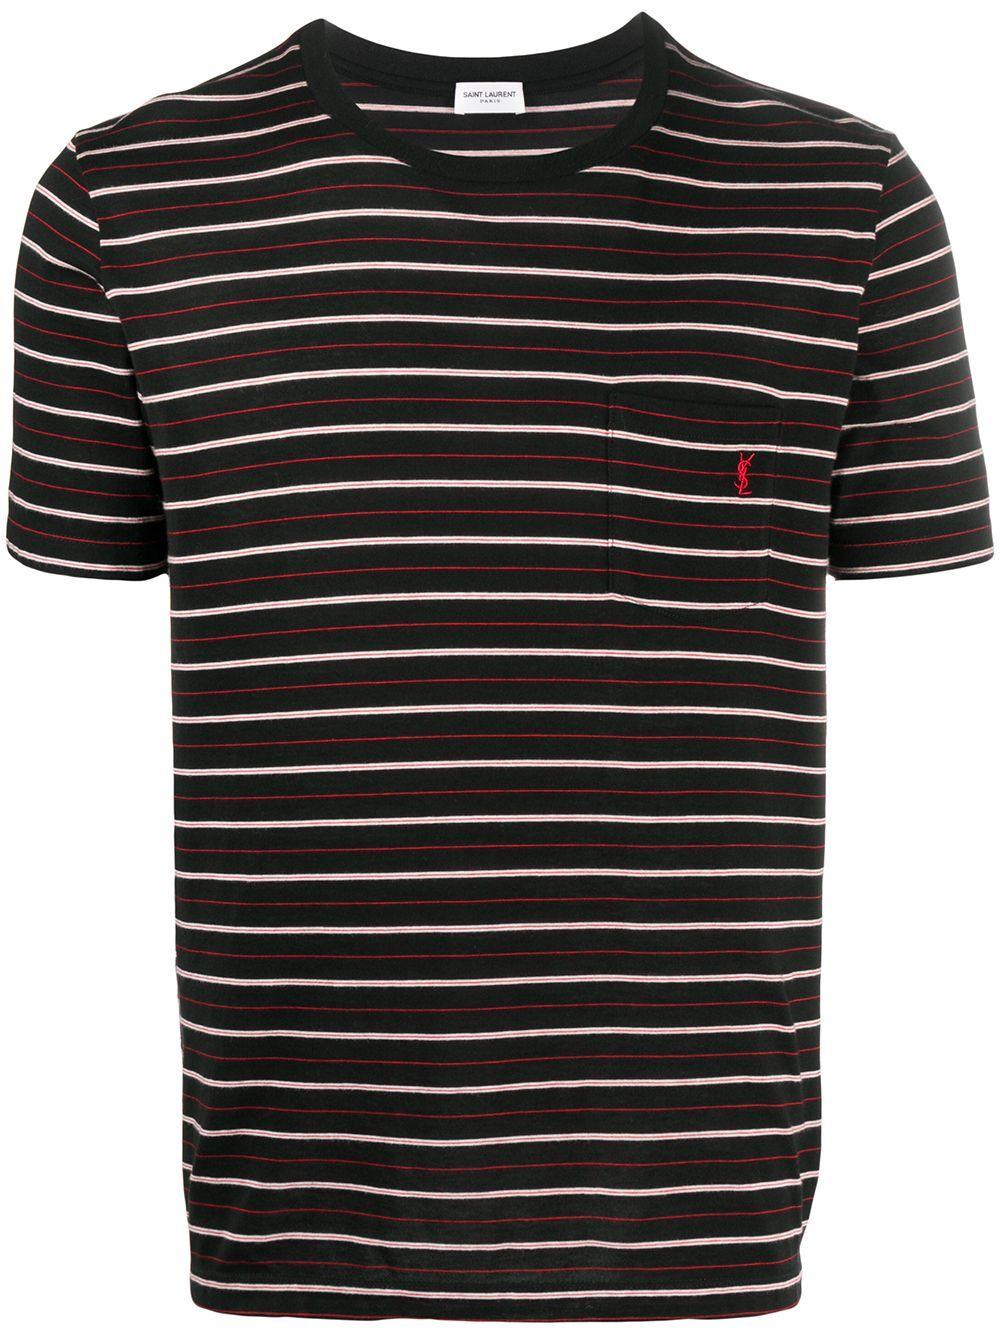 Saint Laurent Cotton T-shirts And Polos in Black for Men - Lyst